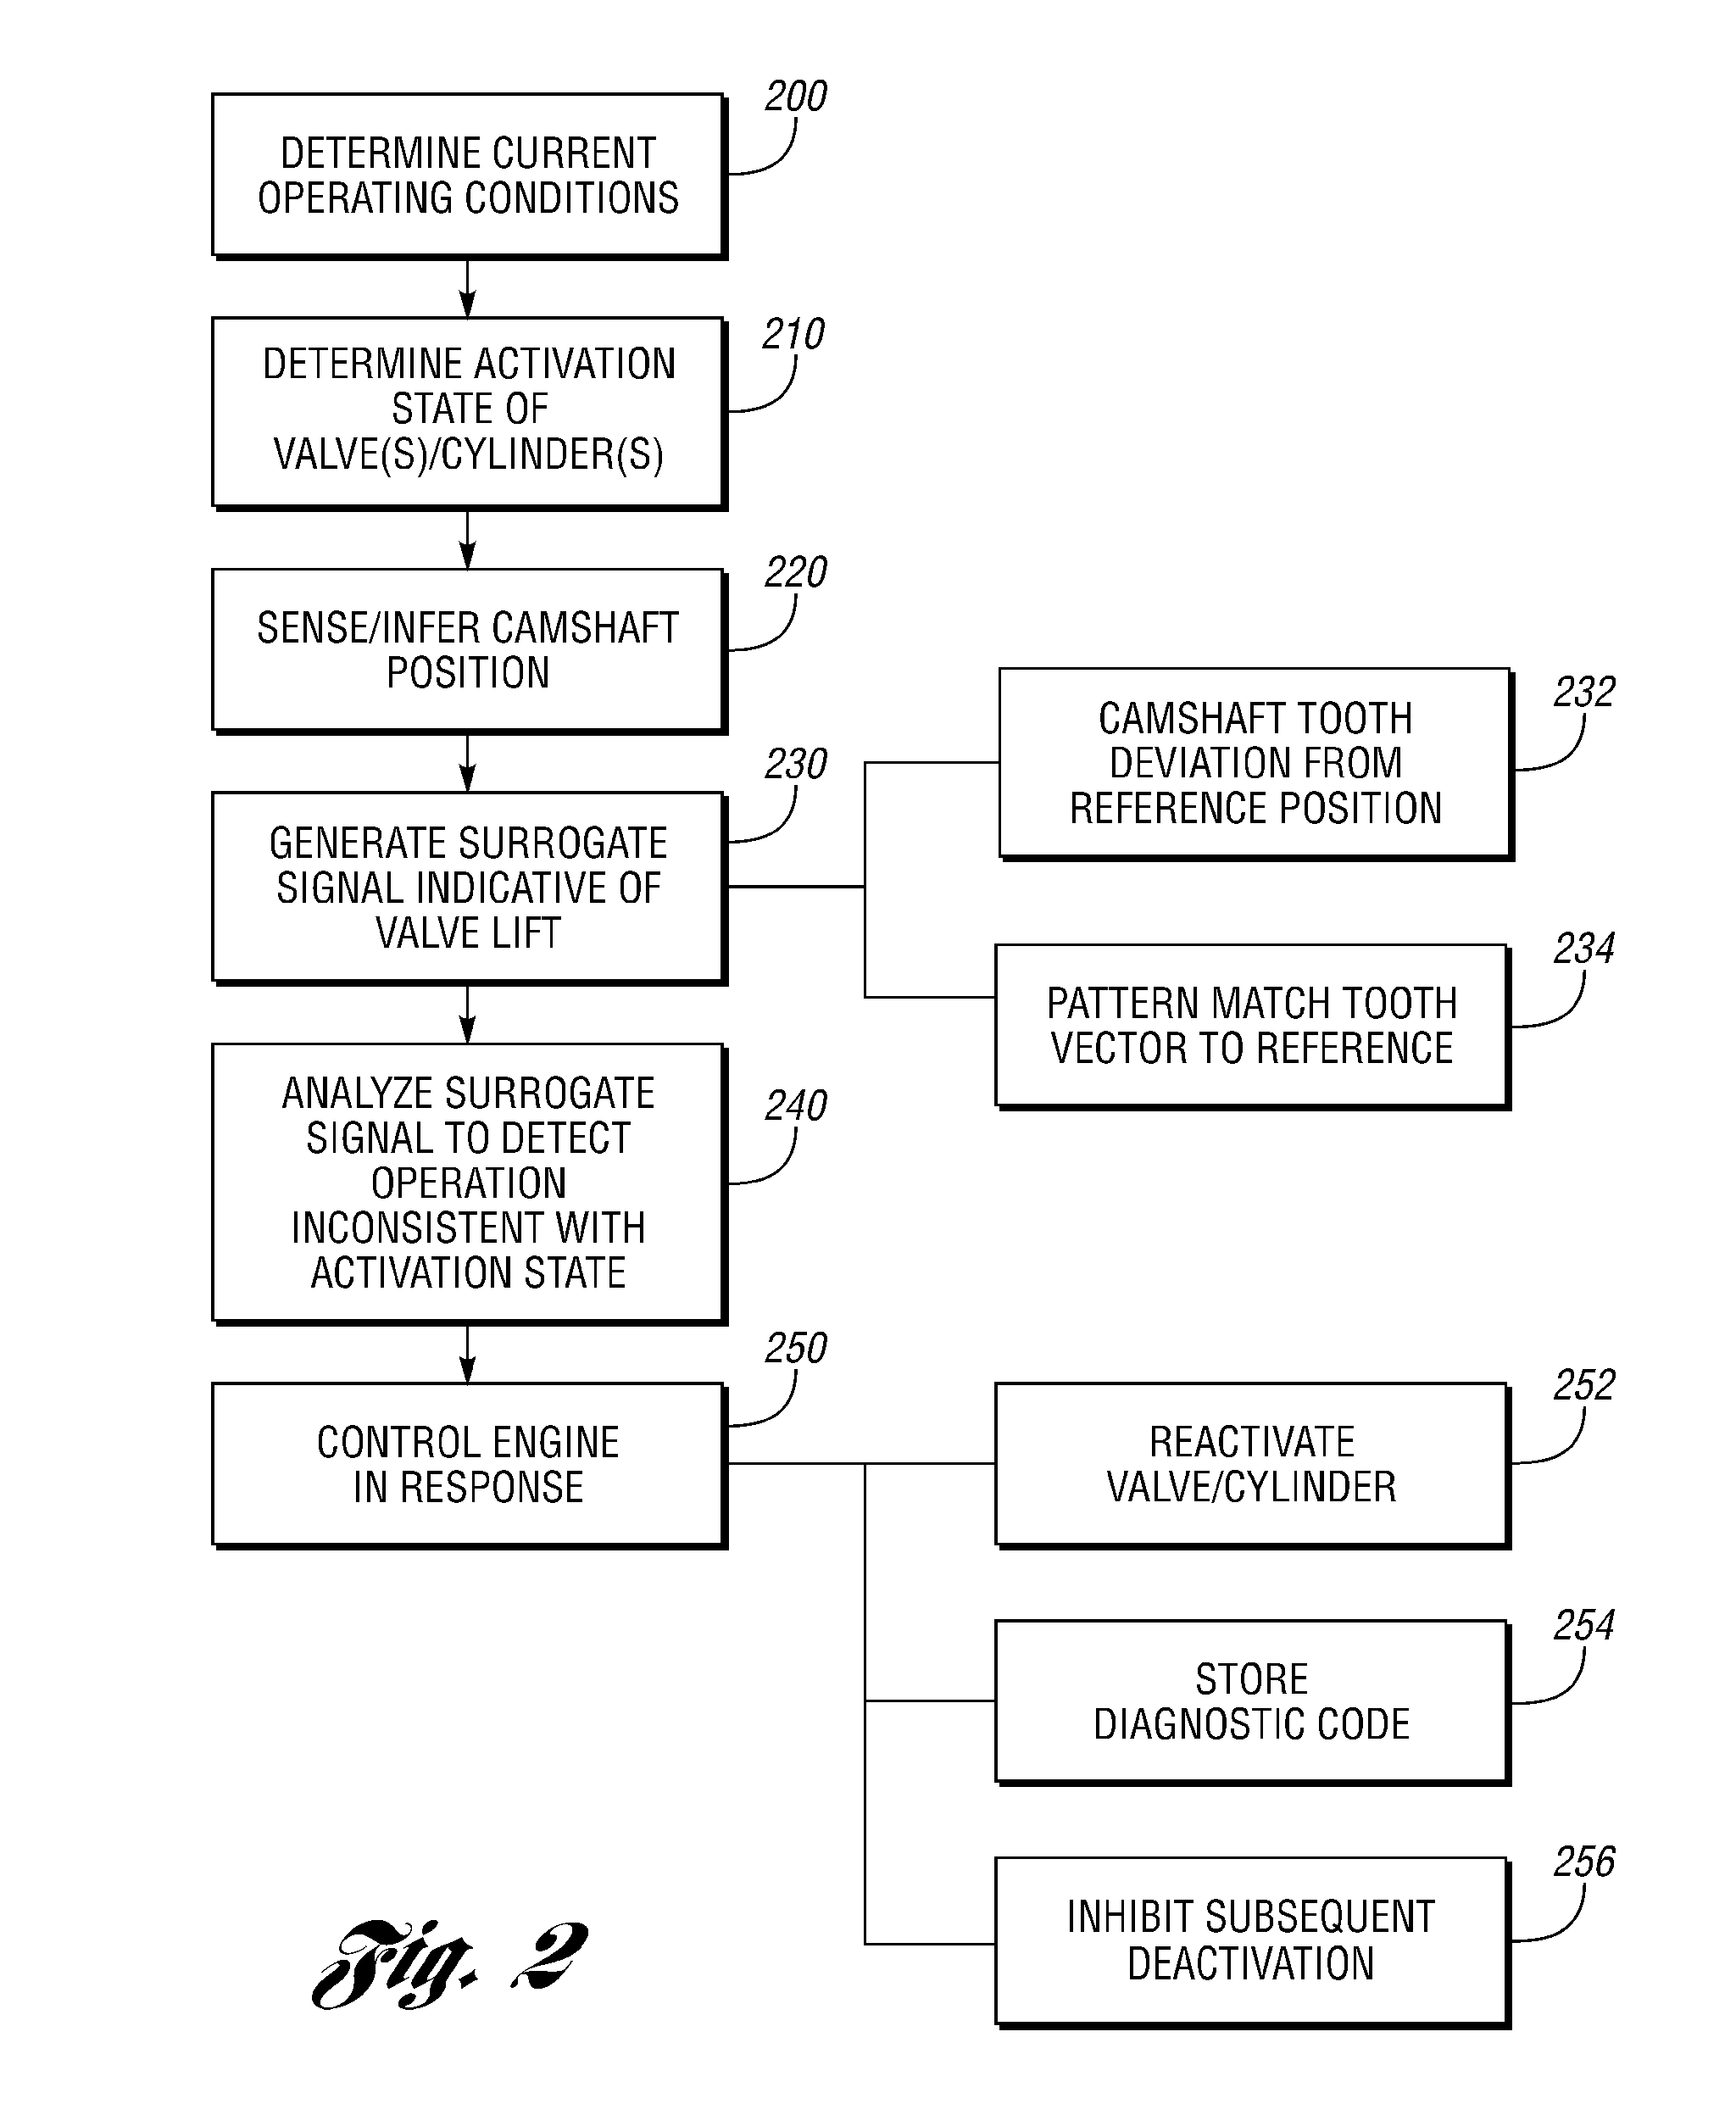 Engine Control with Valve Operation Monitoring Using Camshaft Position Sensing